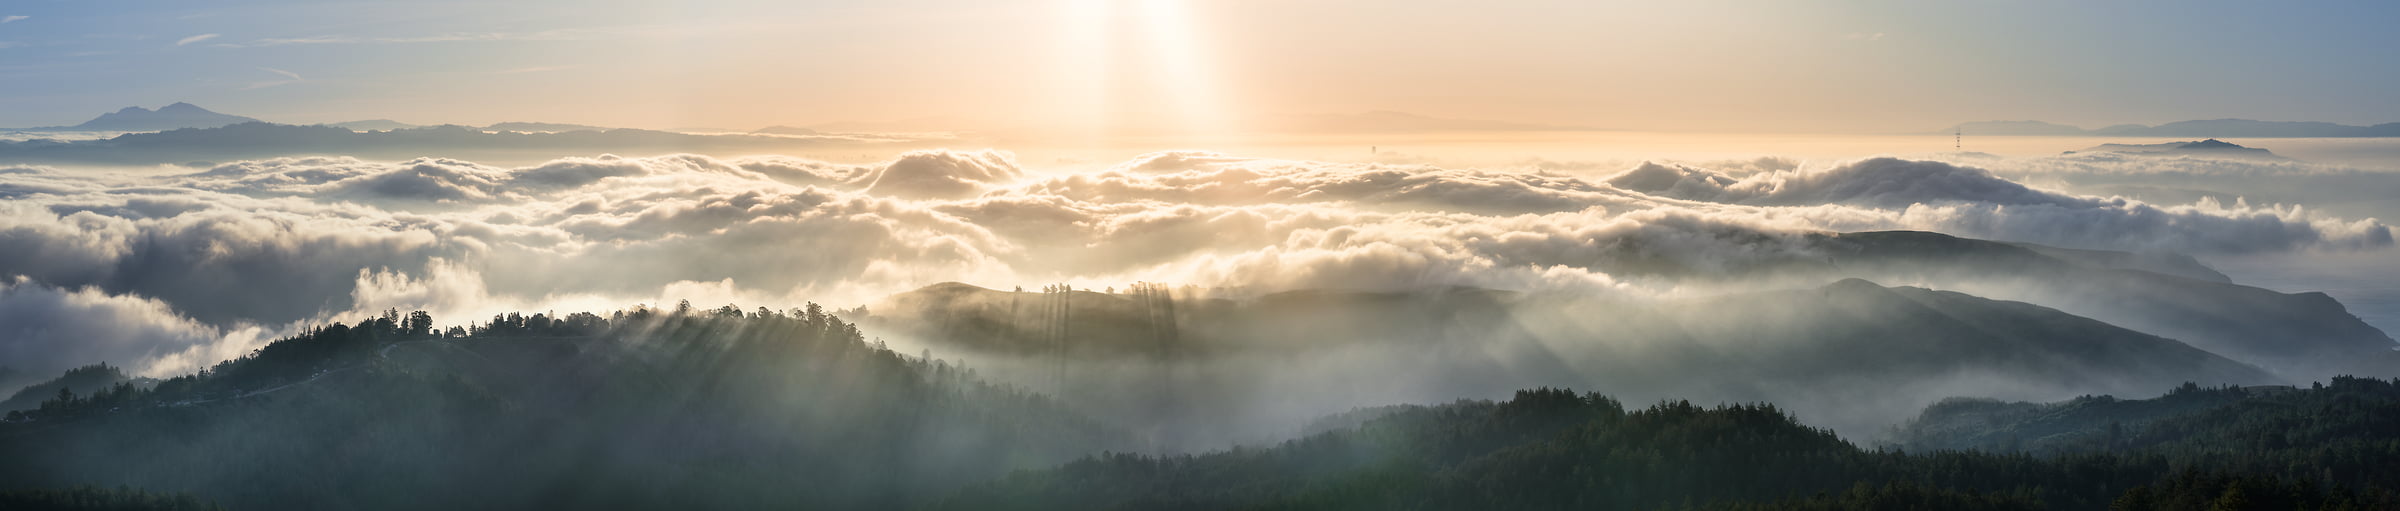 476 megapixels! A very big, high resolution, large-format VAST photo print of a sunrise over mountains and clouds; panorama photograph created by Jeff Lewis in Marin County, California